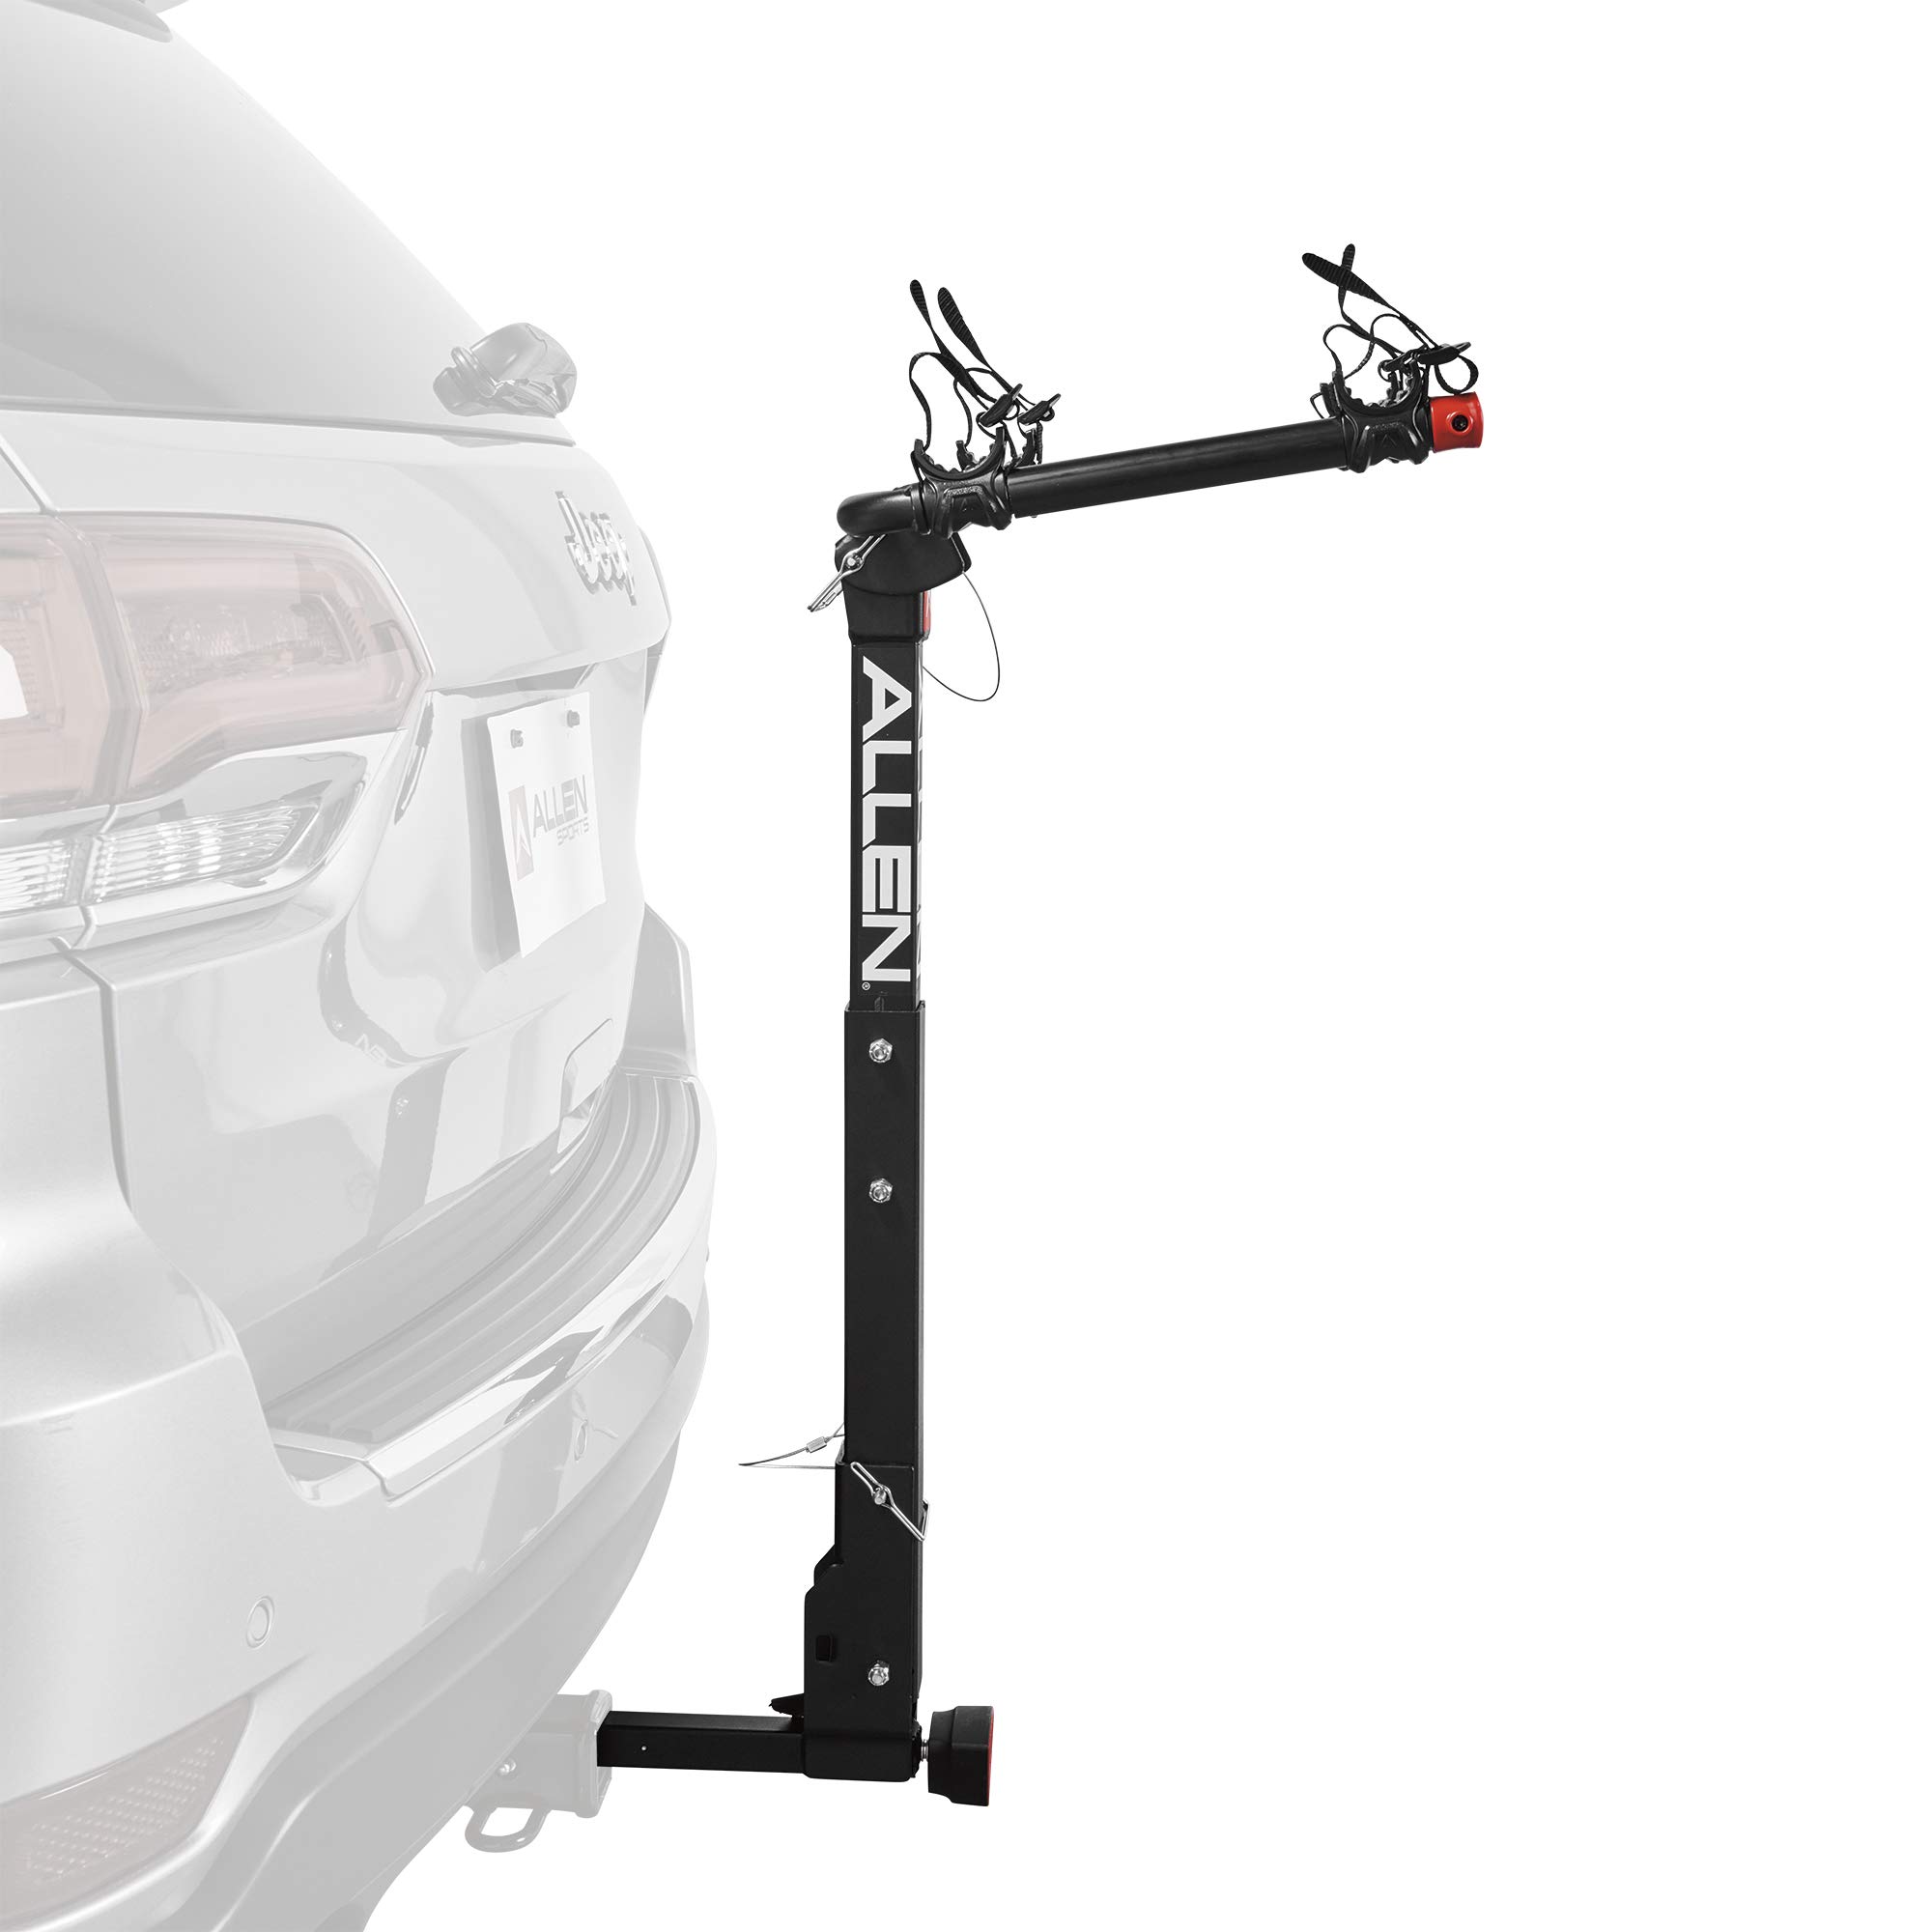 Allen Sports Deluxe Locking Quick Release 2-Bike Carrier for 2 Inch & 1 4 in. Hitch, Model 522QR , Black